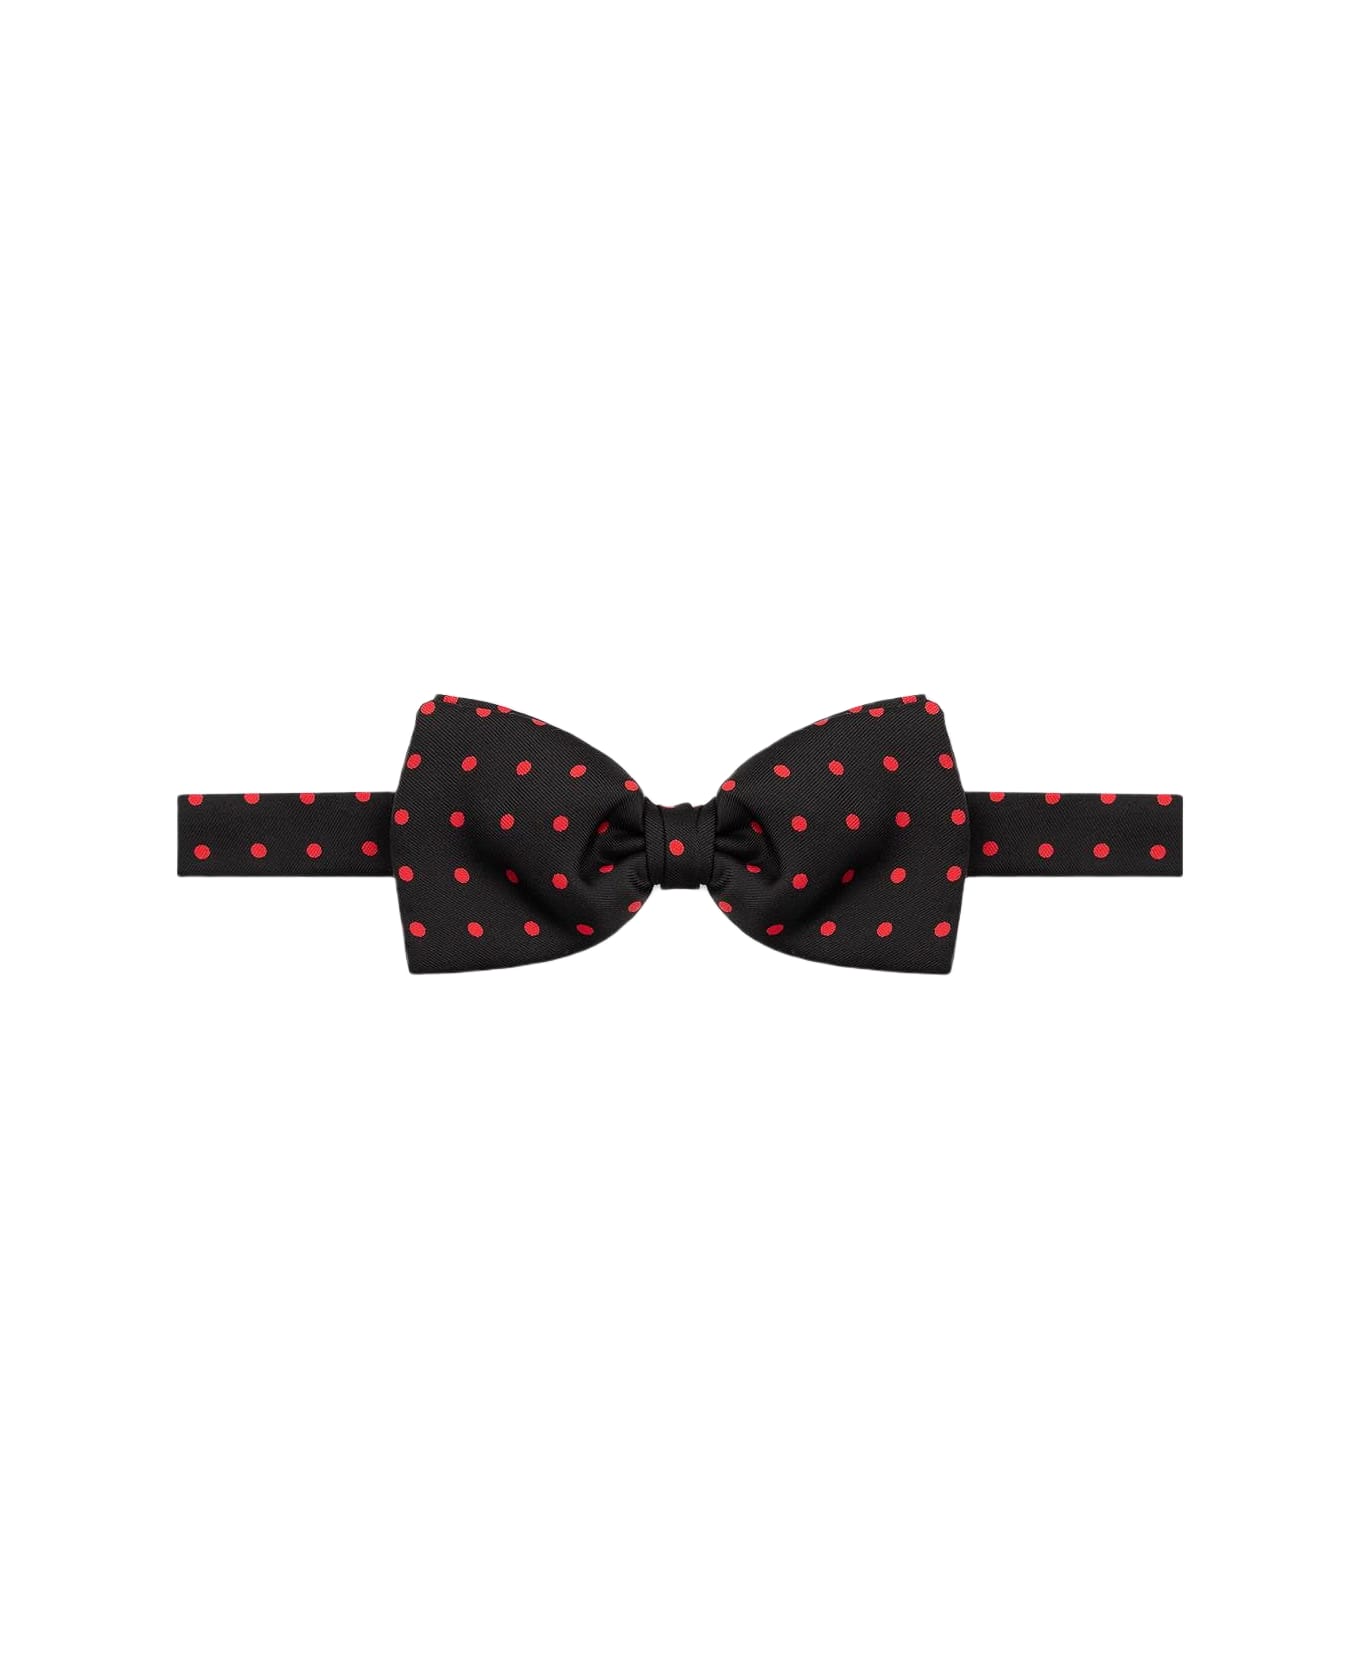 Larusmiani Bow Tie 'popping' Tie - Red ネクタイ